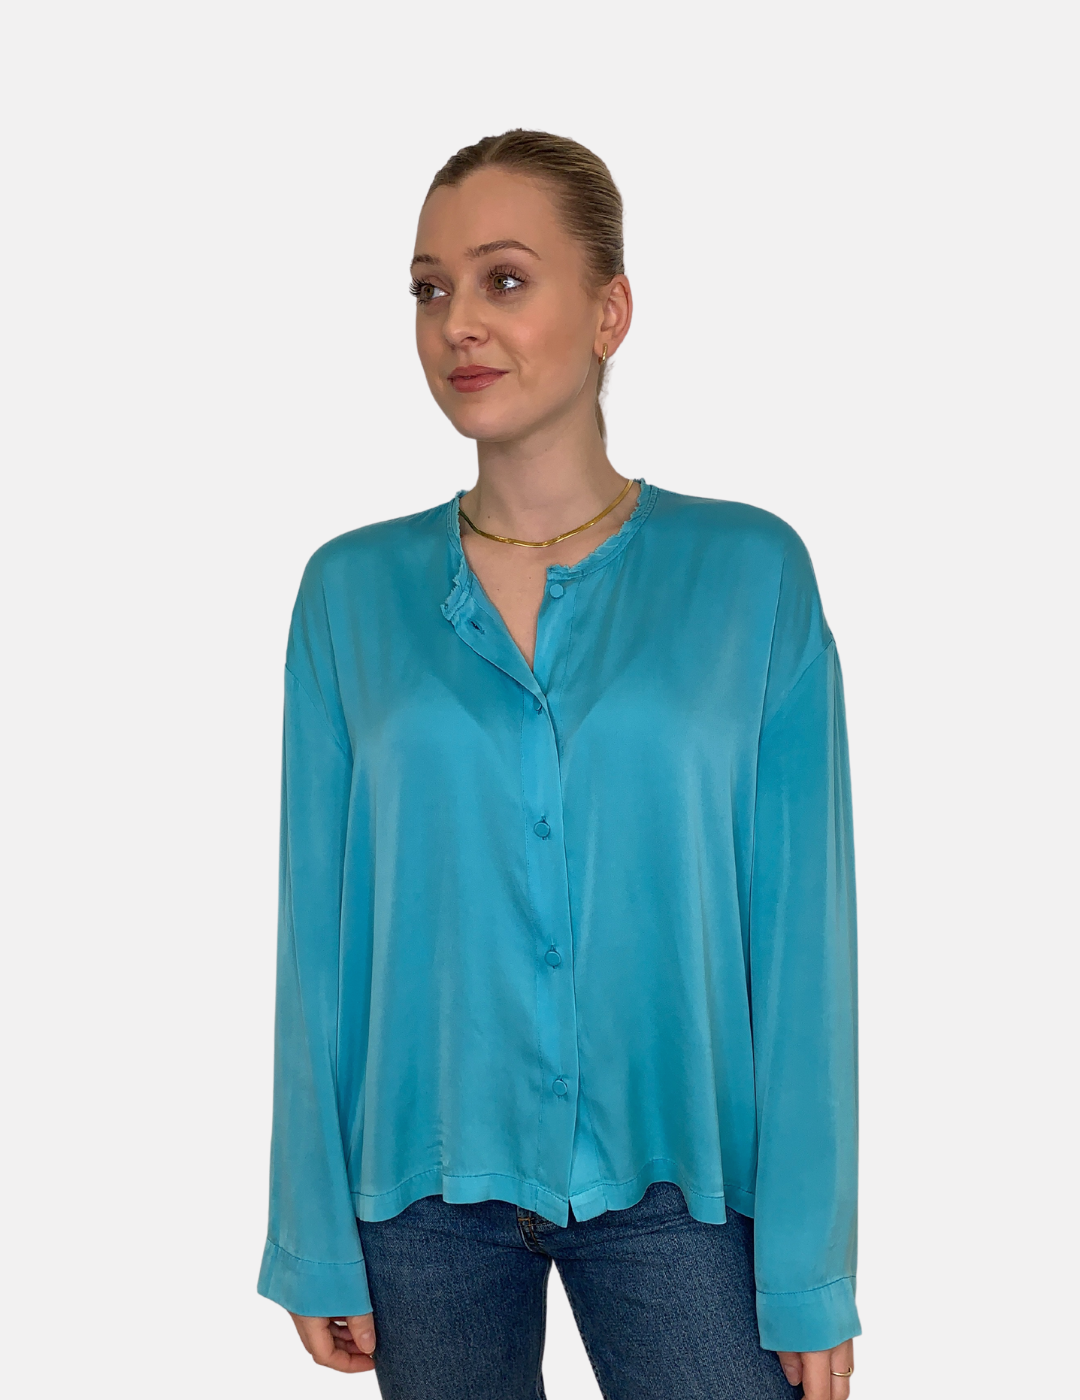 Turquoise stretch silk blouse that buttons through with a raw collar